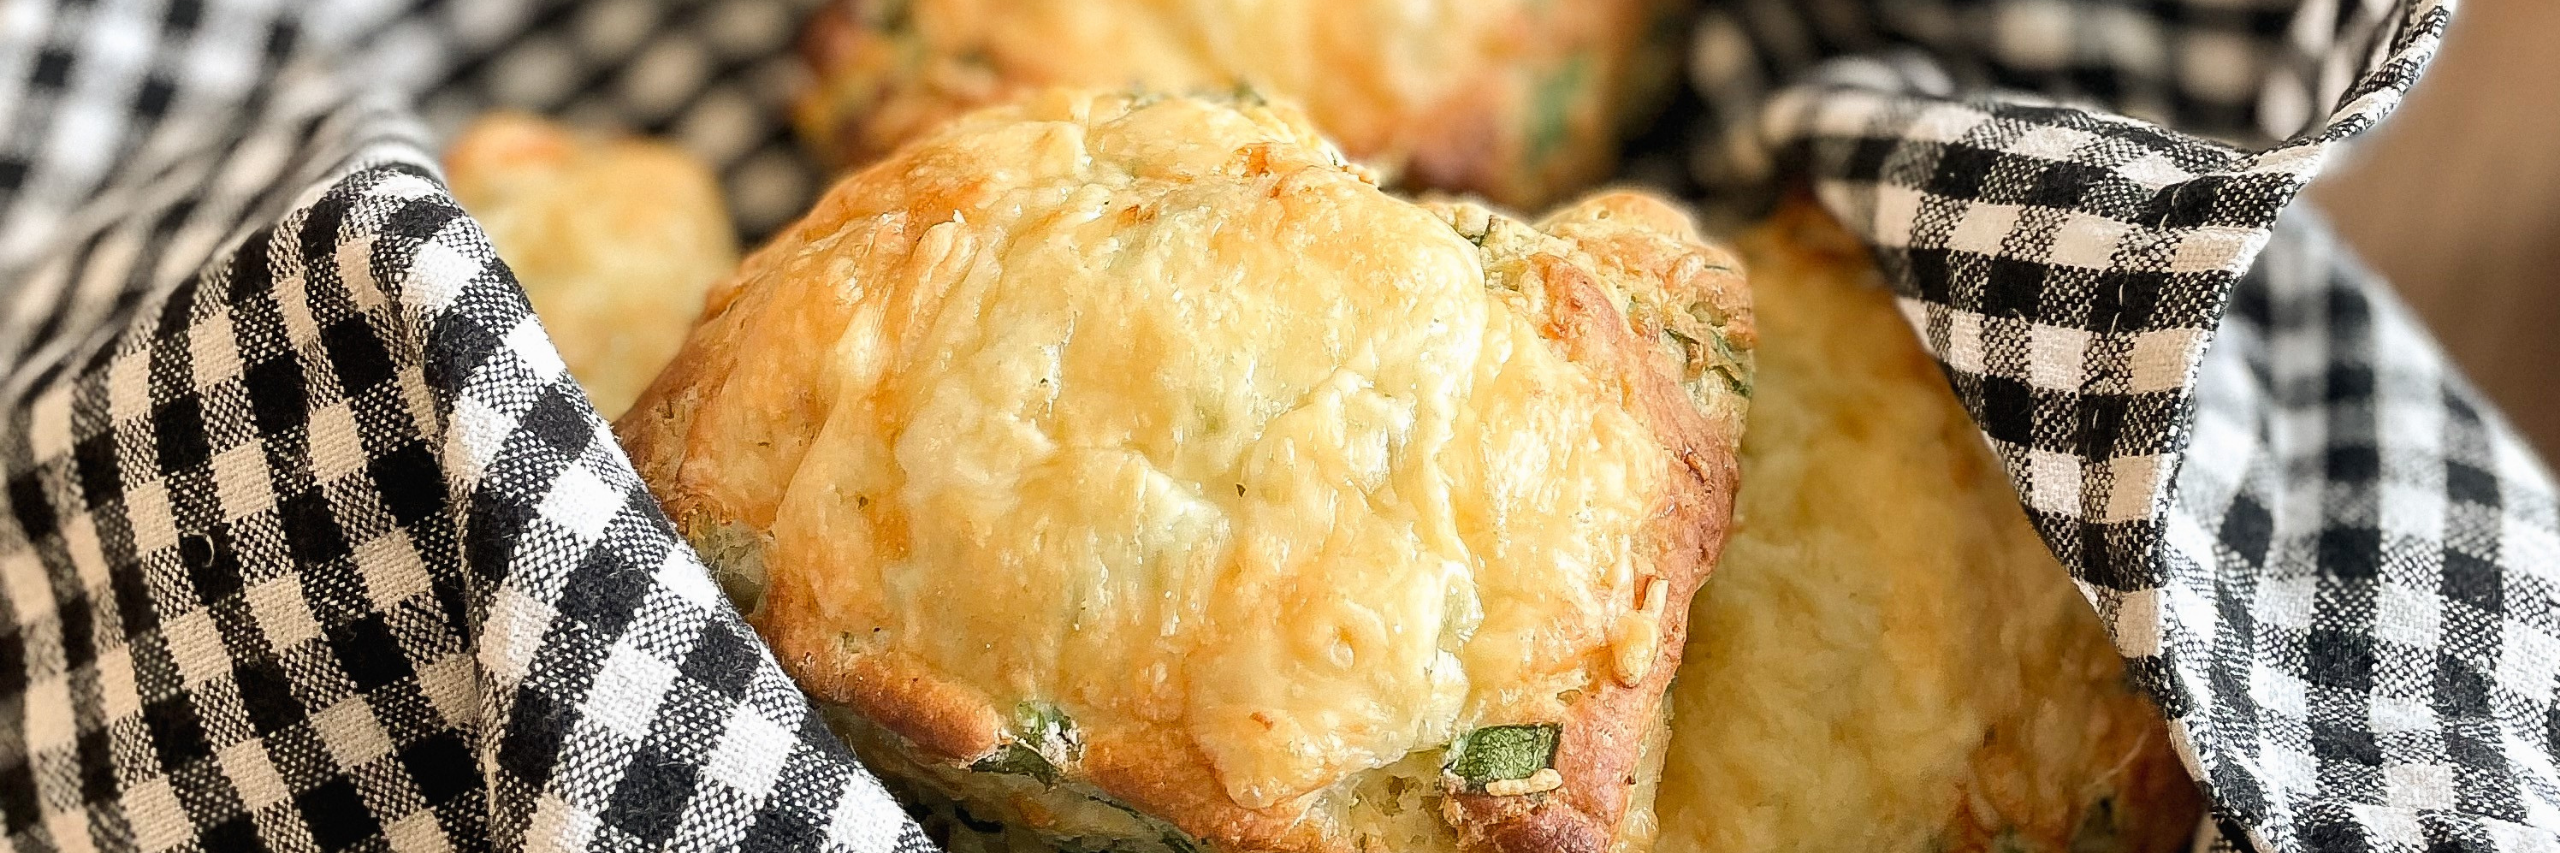 LeaderBrand Spinach and Cheese Scone Recipe